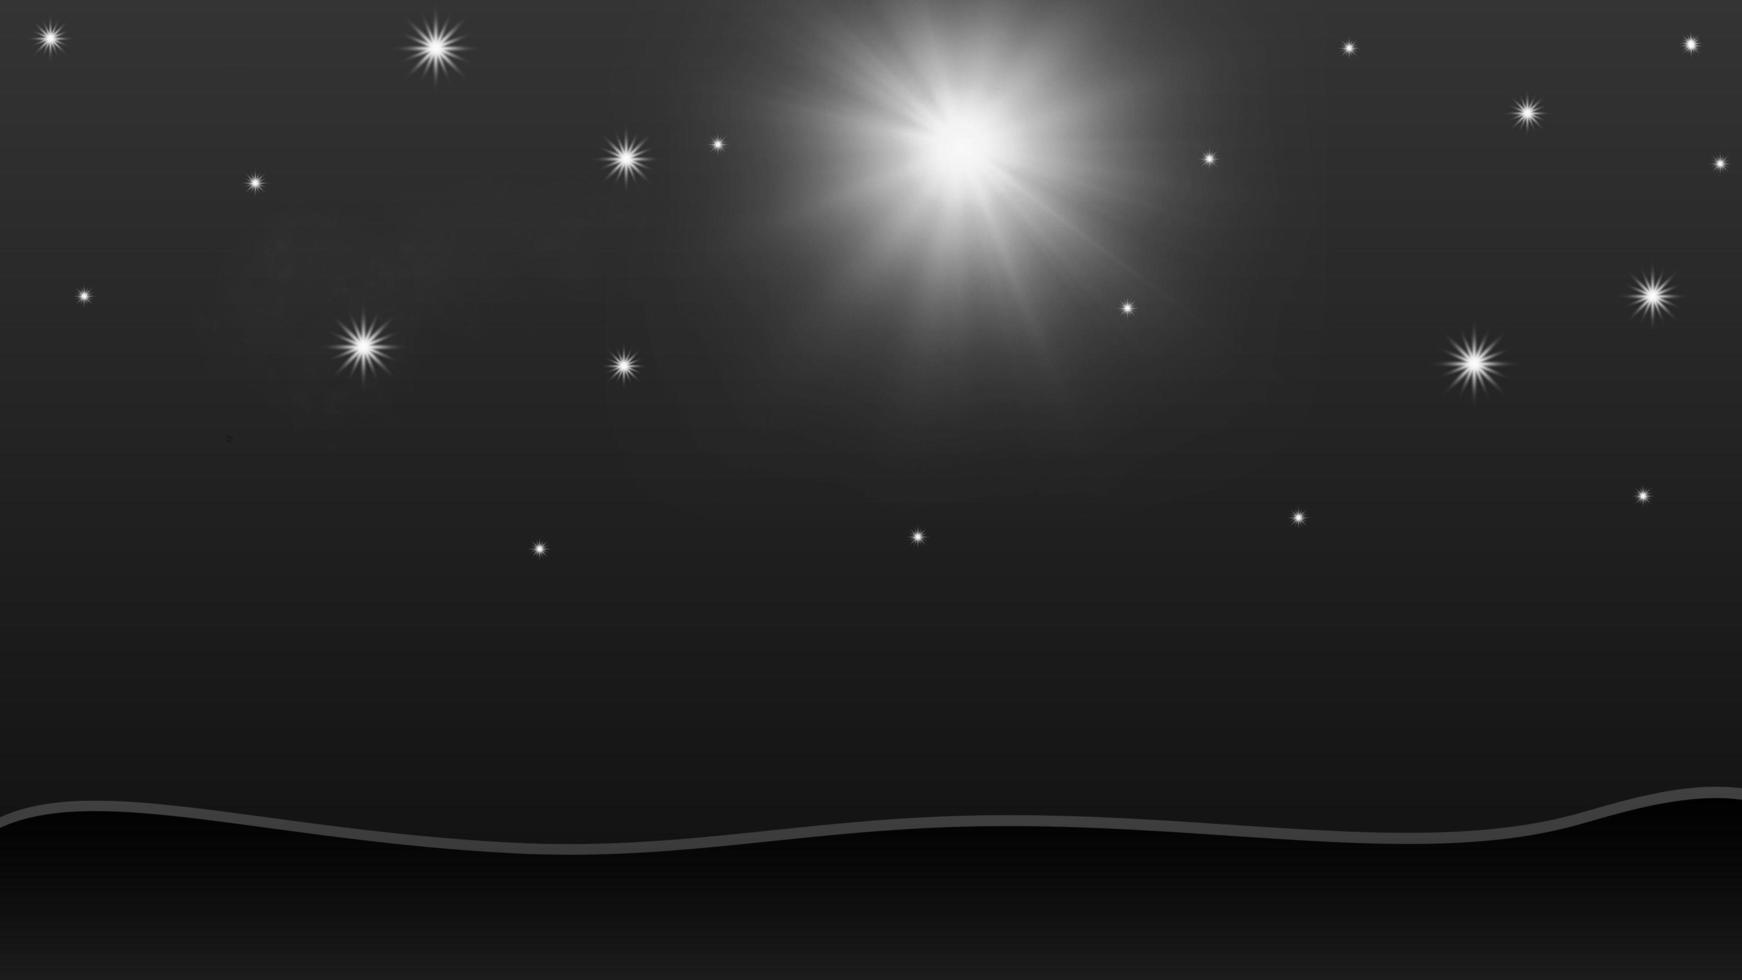 Abstract gradient background dark black landscape with starlight perfect for wallpaper, design, etc photo